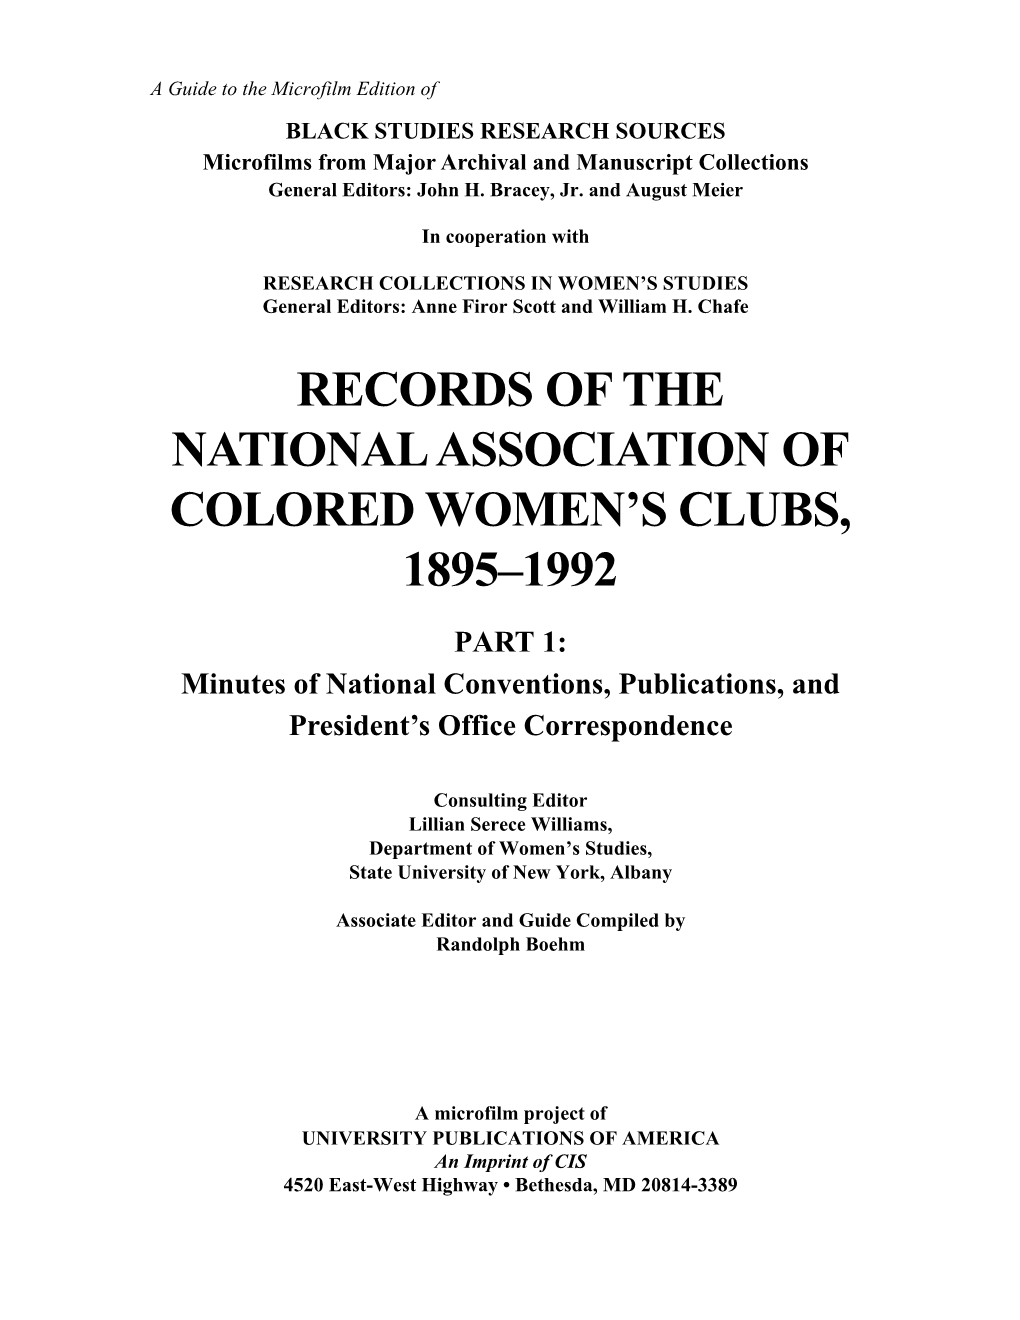 Records of the National Association of Colored Women's